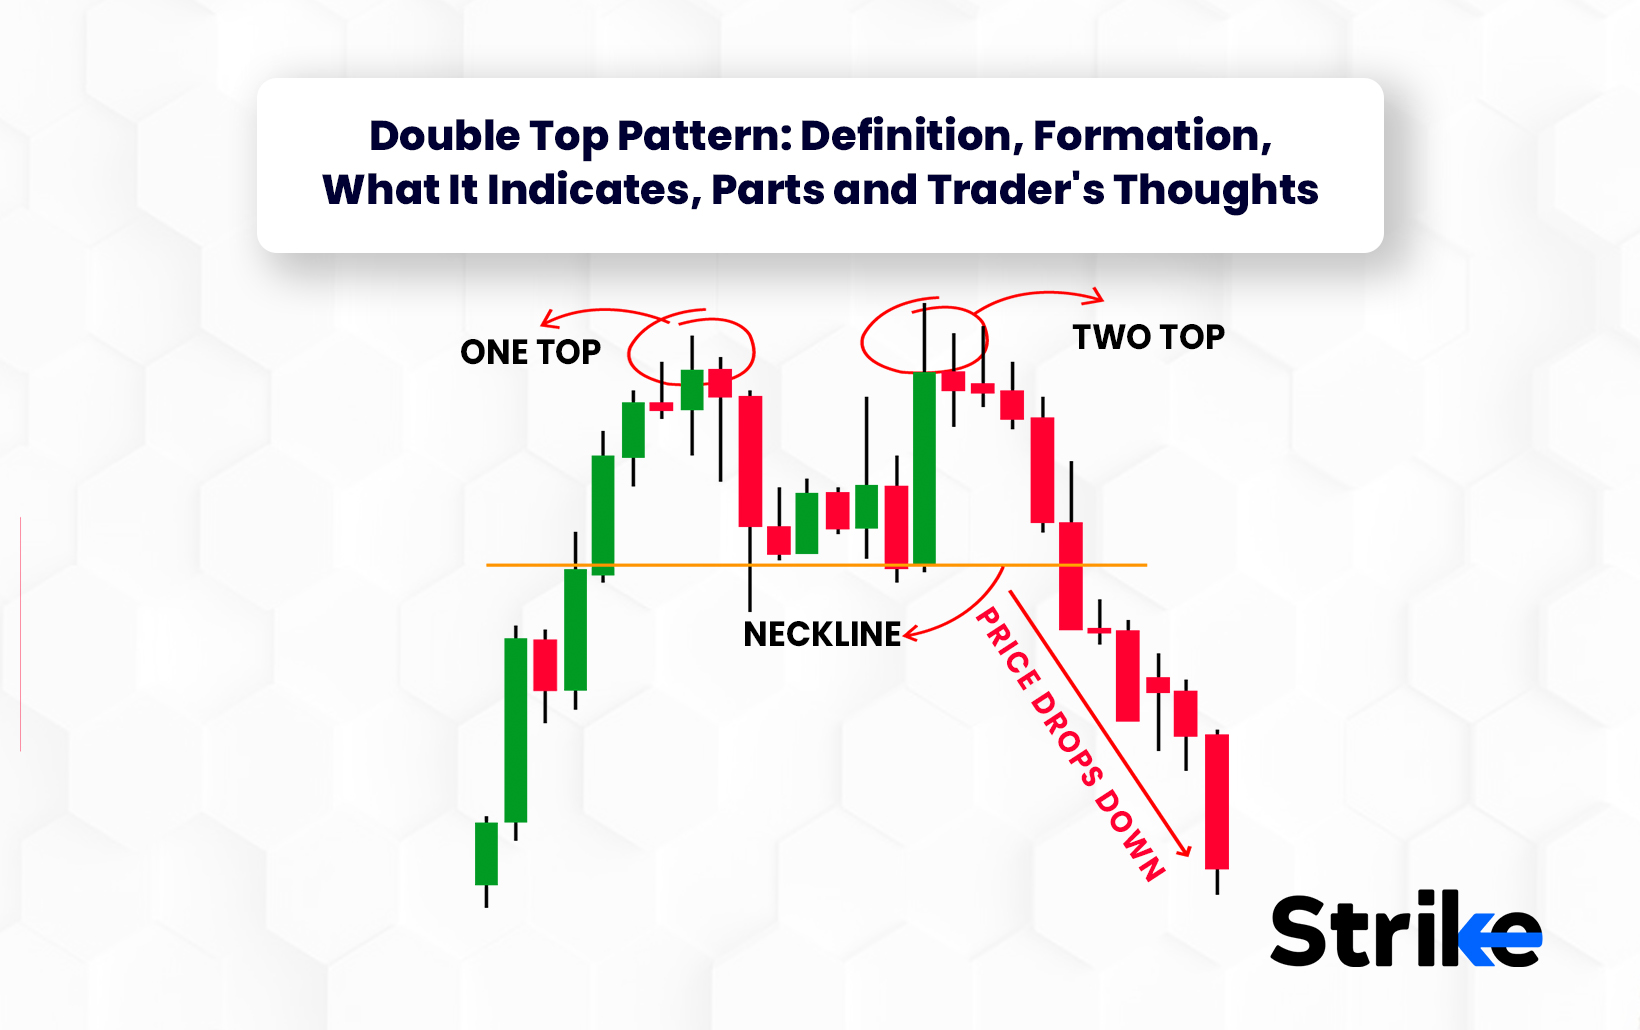 Double Top Pattern: Definition, Formation, What It Indicates